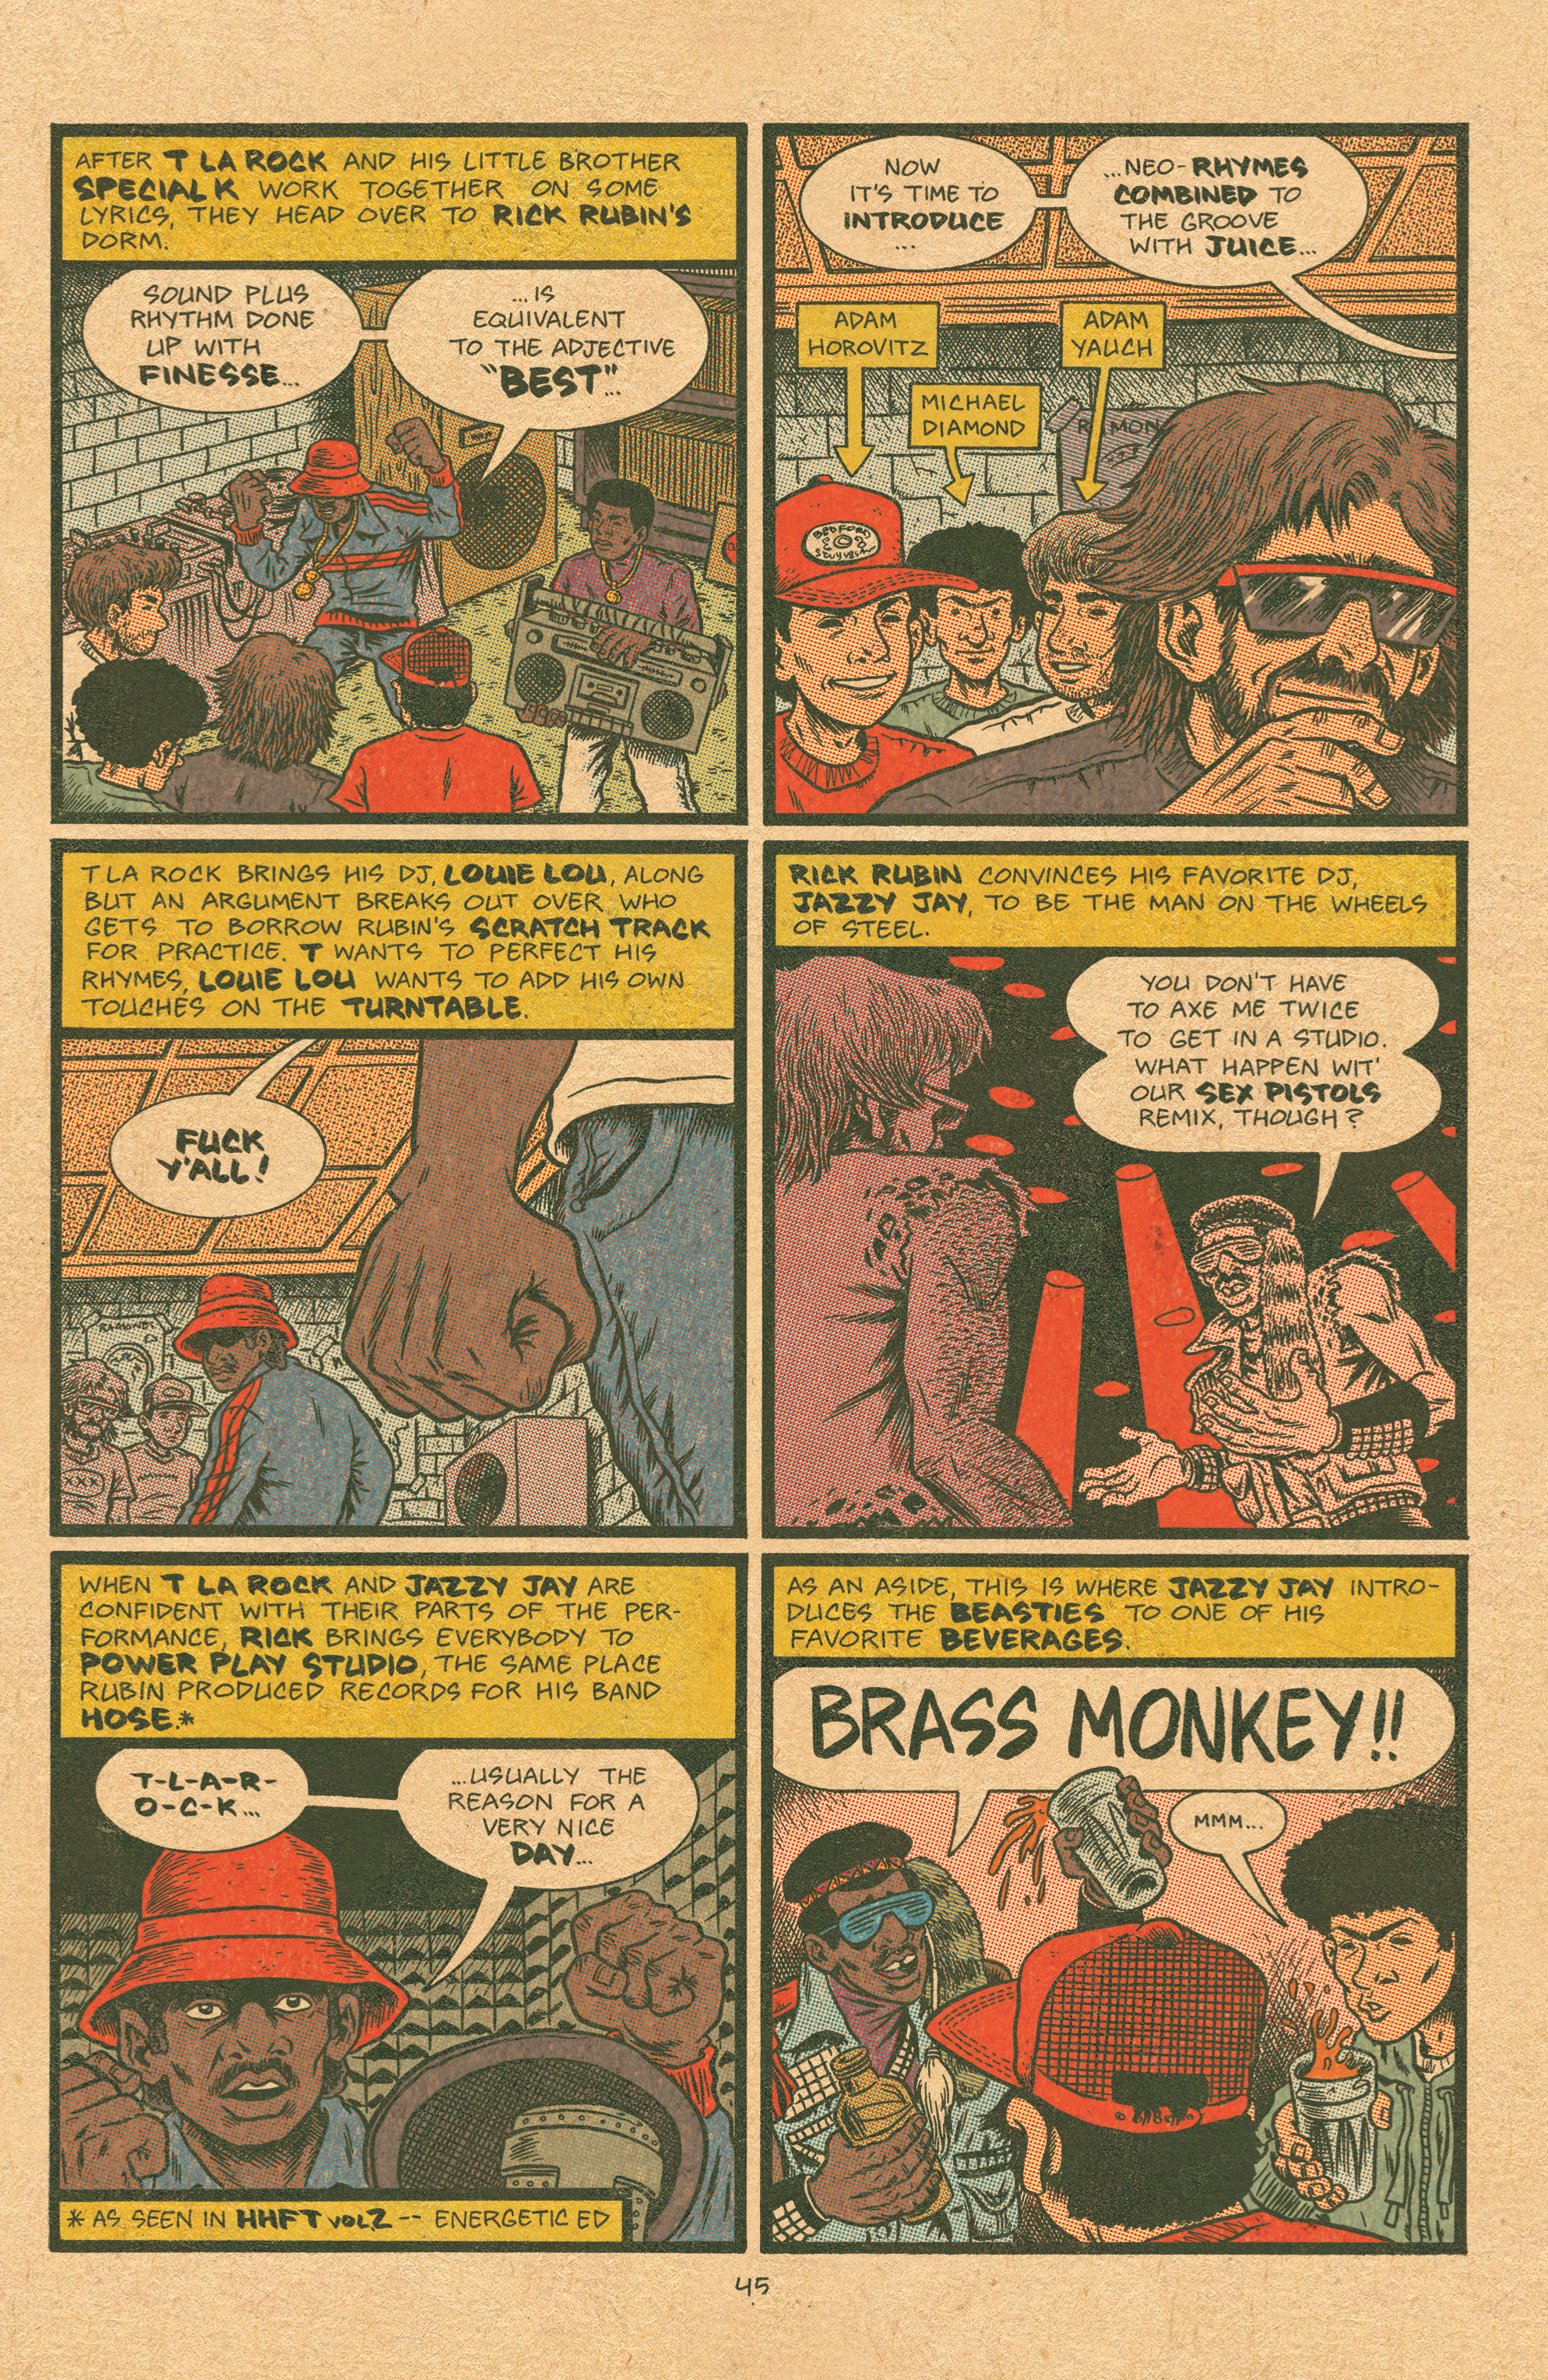 Read online Free Comic Book Day 2015 comic -  Issue # Hip Hop Family Tree Three-in-One - Featuring Cosplayers - 19